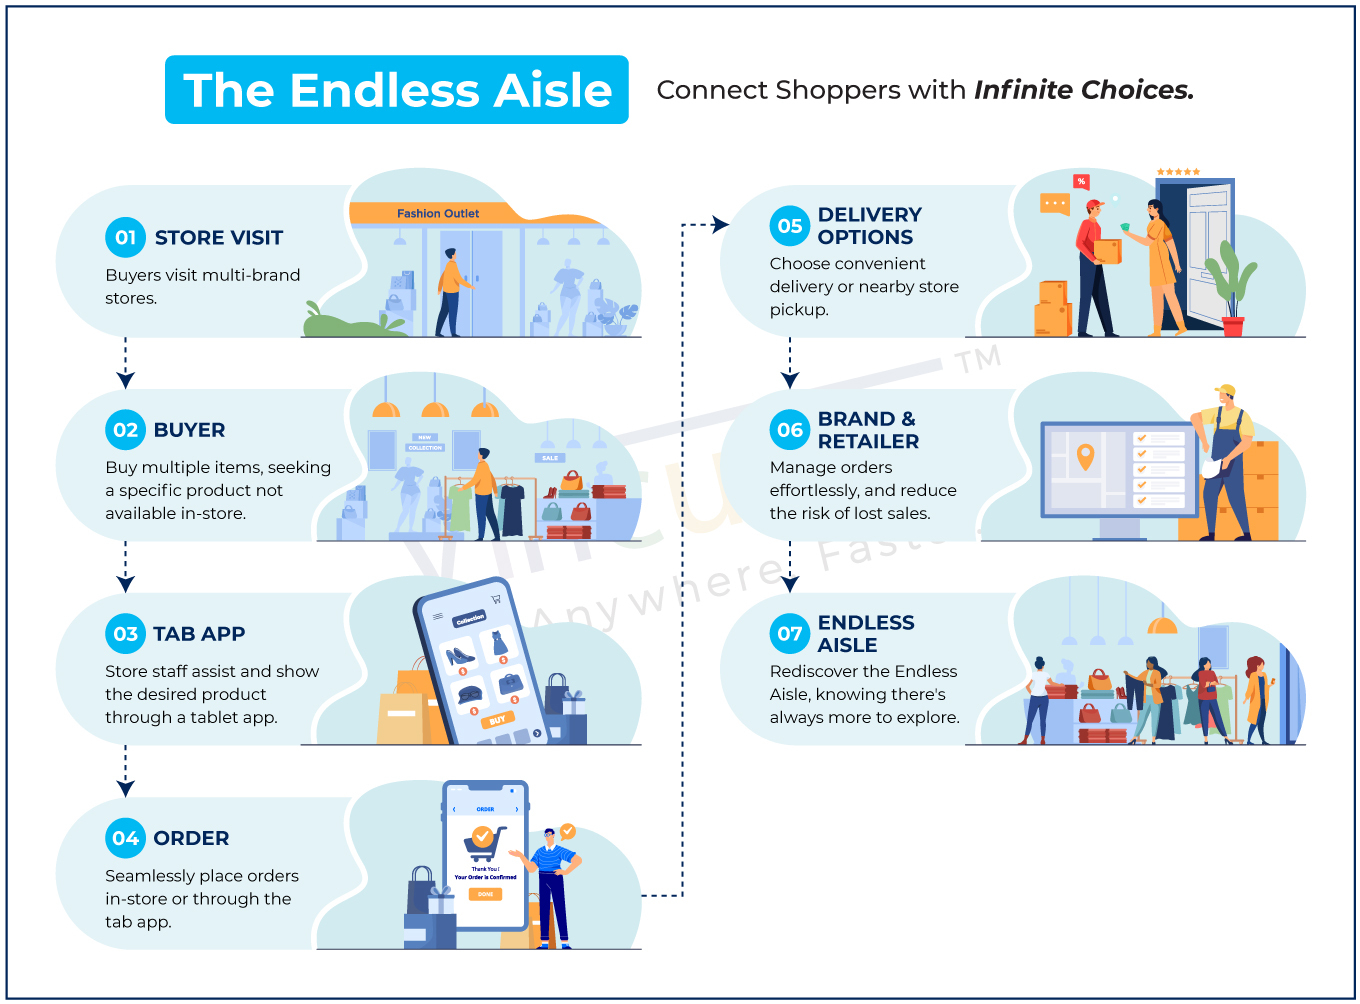 Benefits of the Endless Aisle in Omnichannel Retailing: